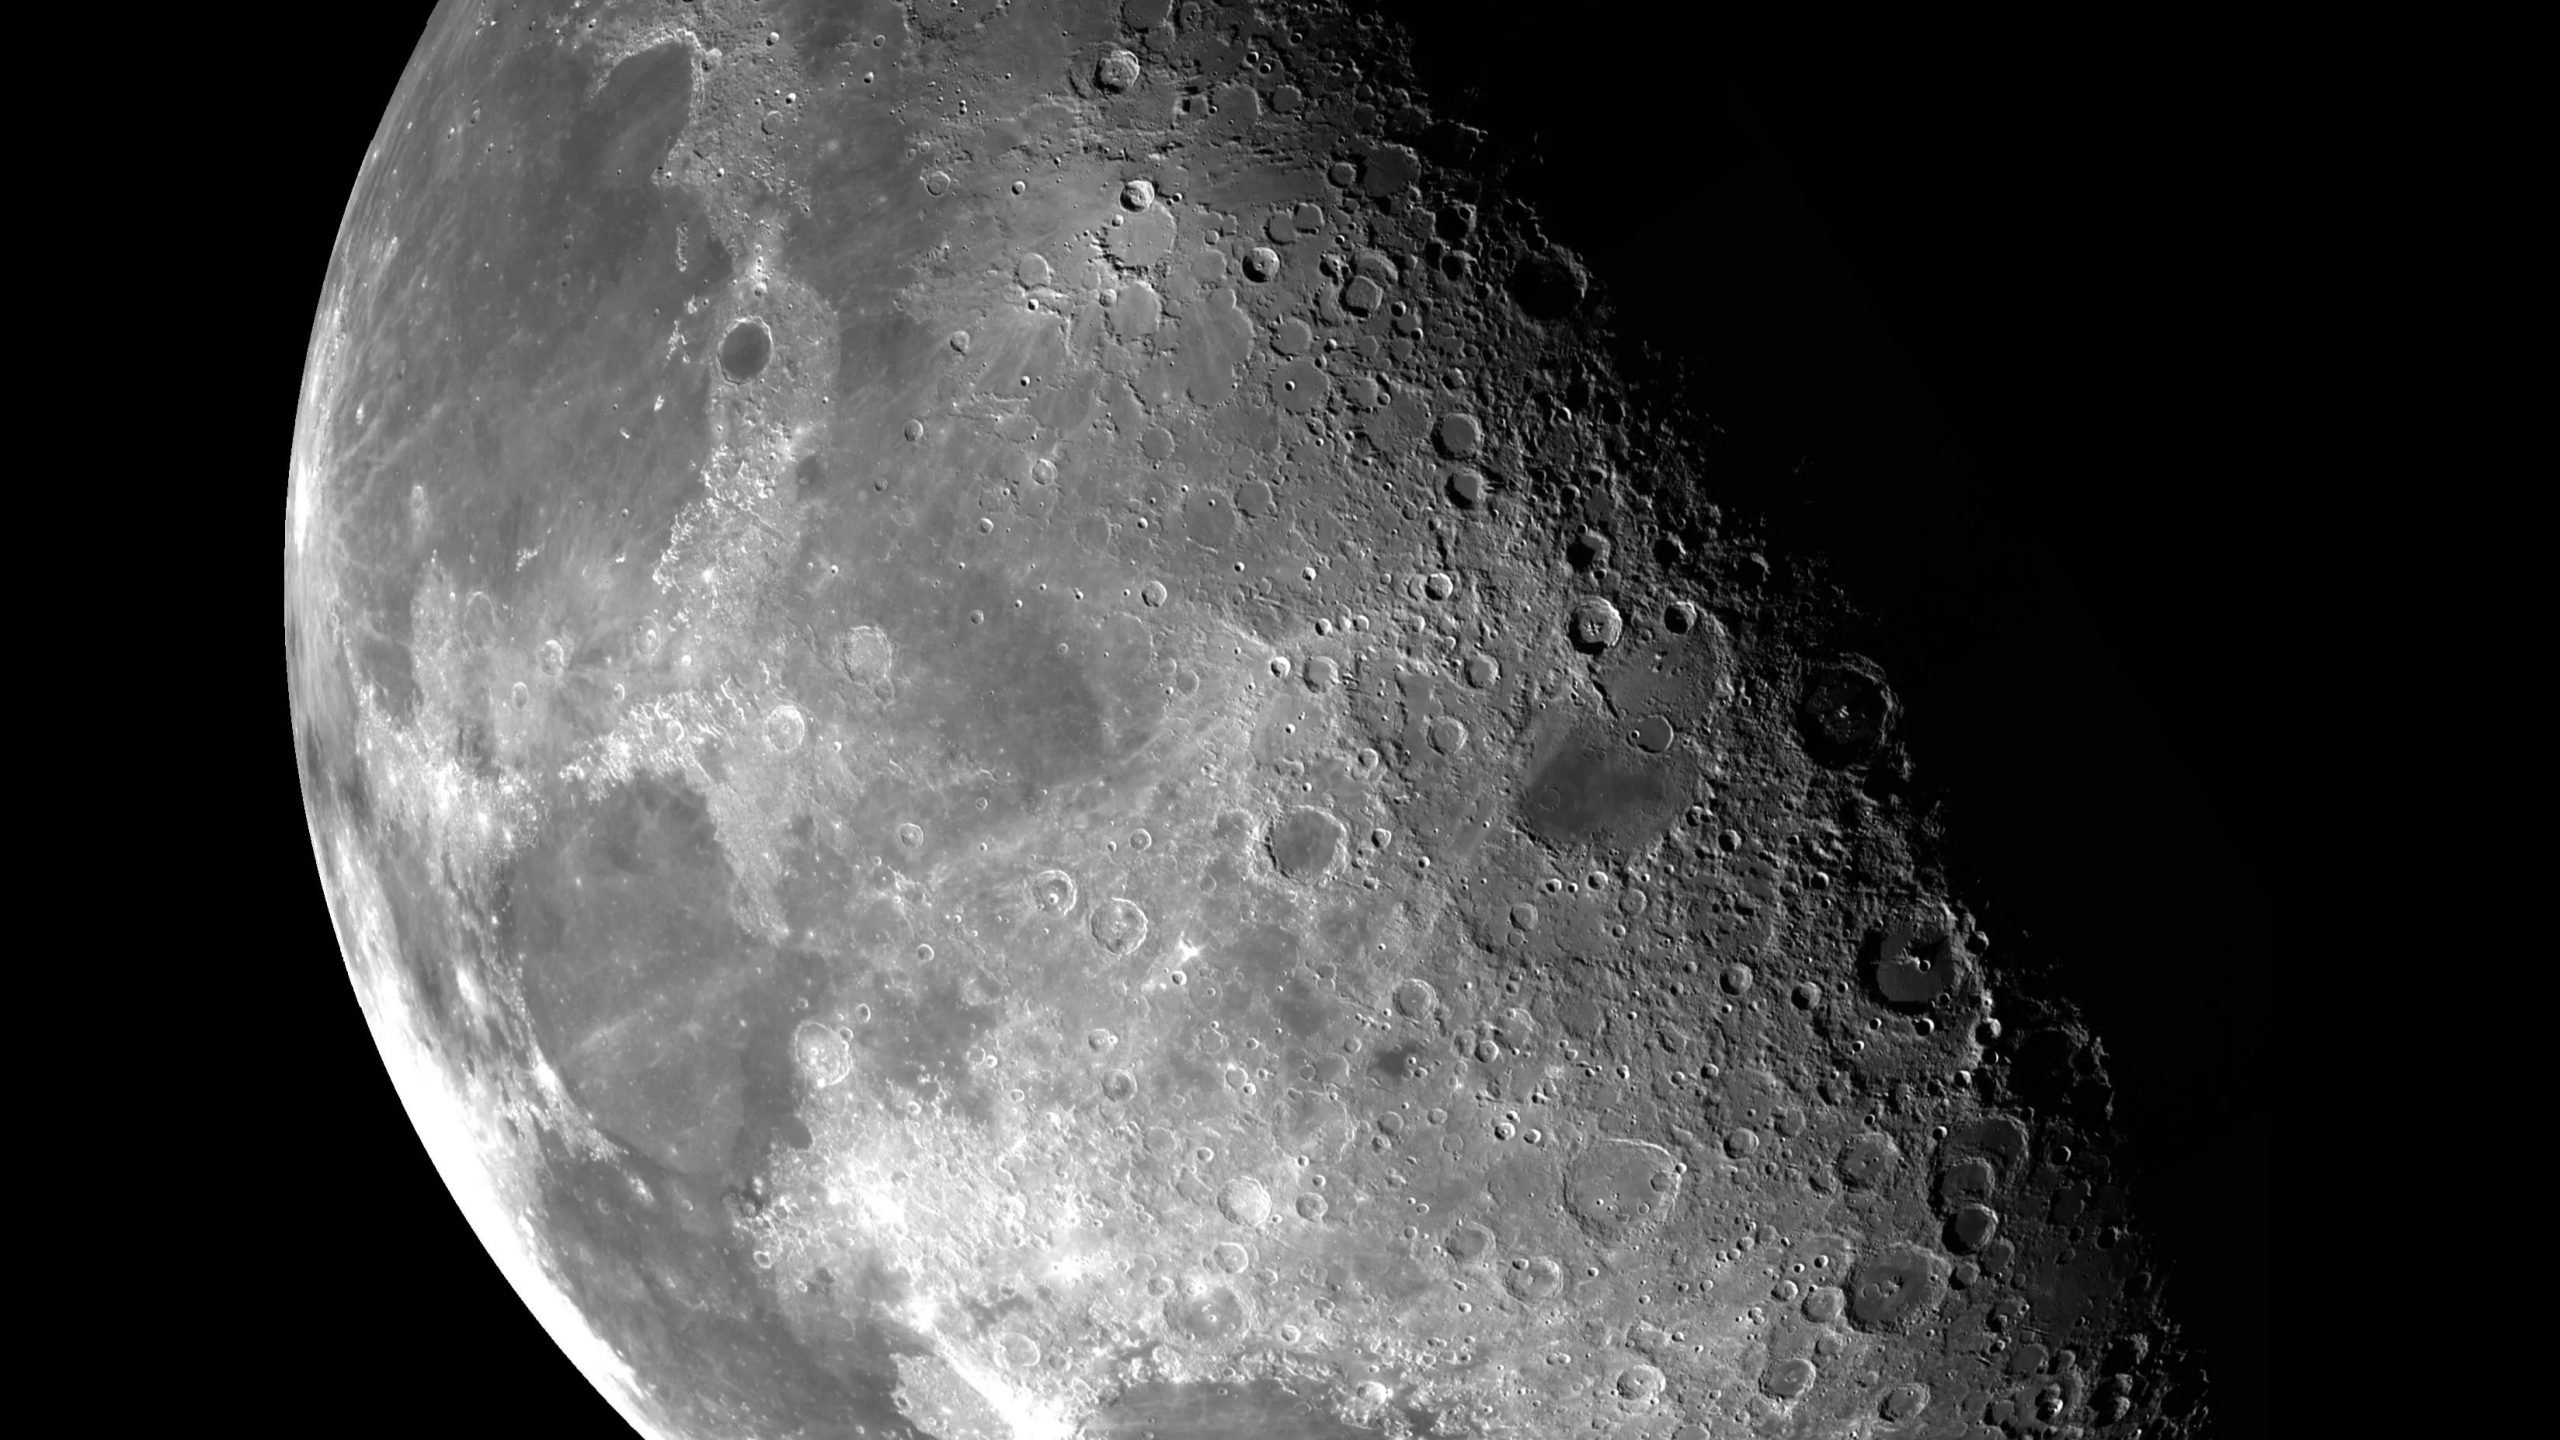 There is water on the moon, confirm scientists